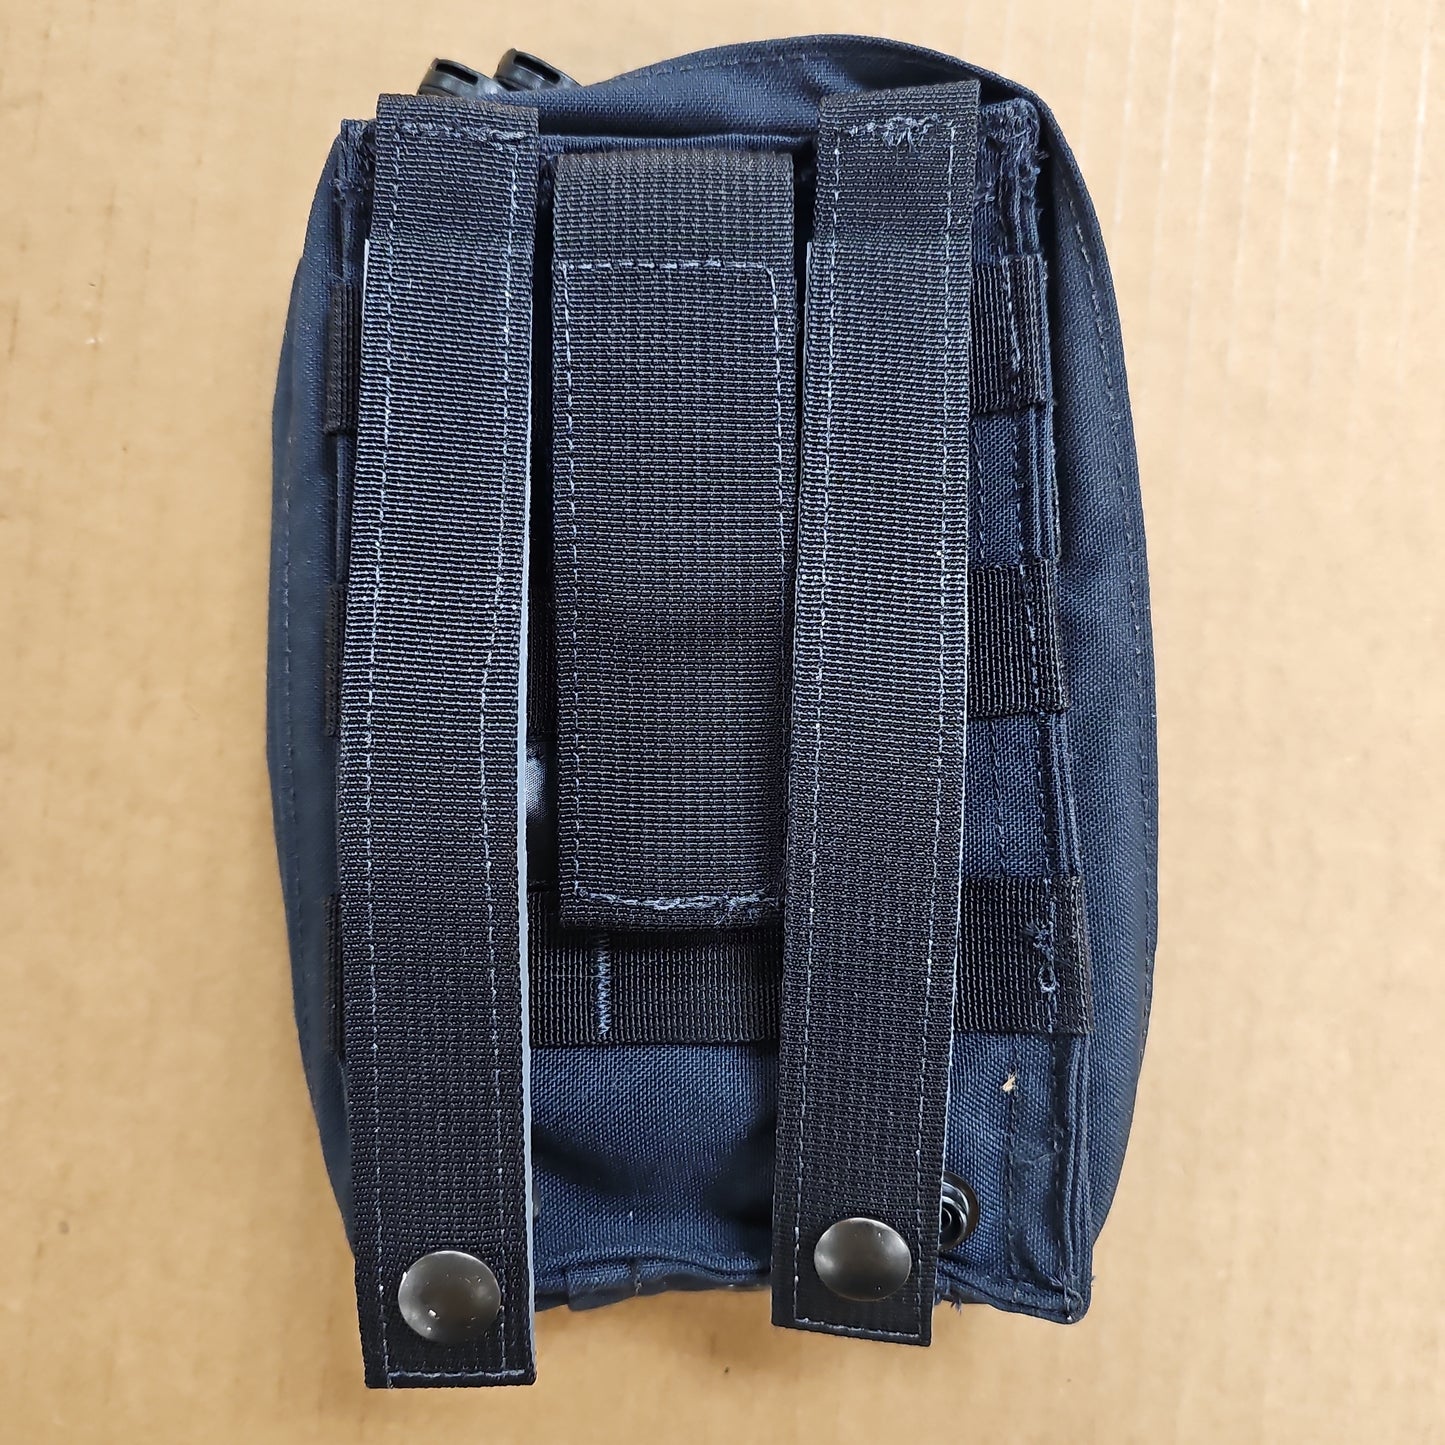 Tactical Pouch: Medic, Navy TP20-YB